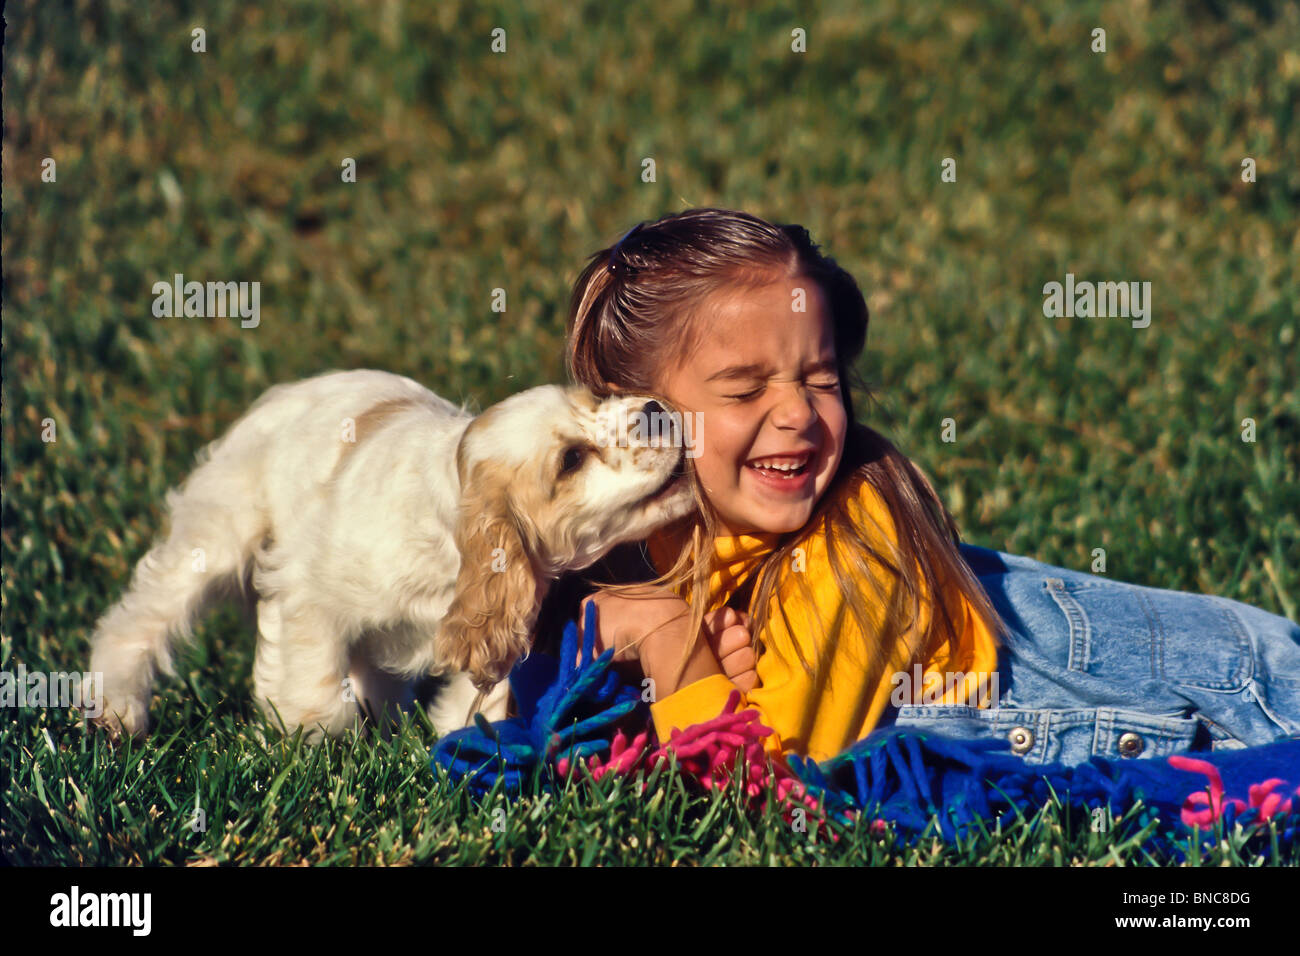 5-6 year years old child children having fun playing with pet dog girl playful puppy dog licking face Side view profile front MR  ©Myrleen Pearson Stock Photo